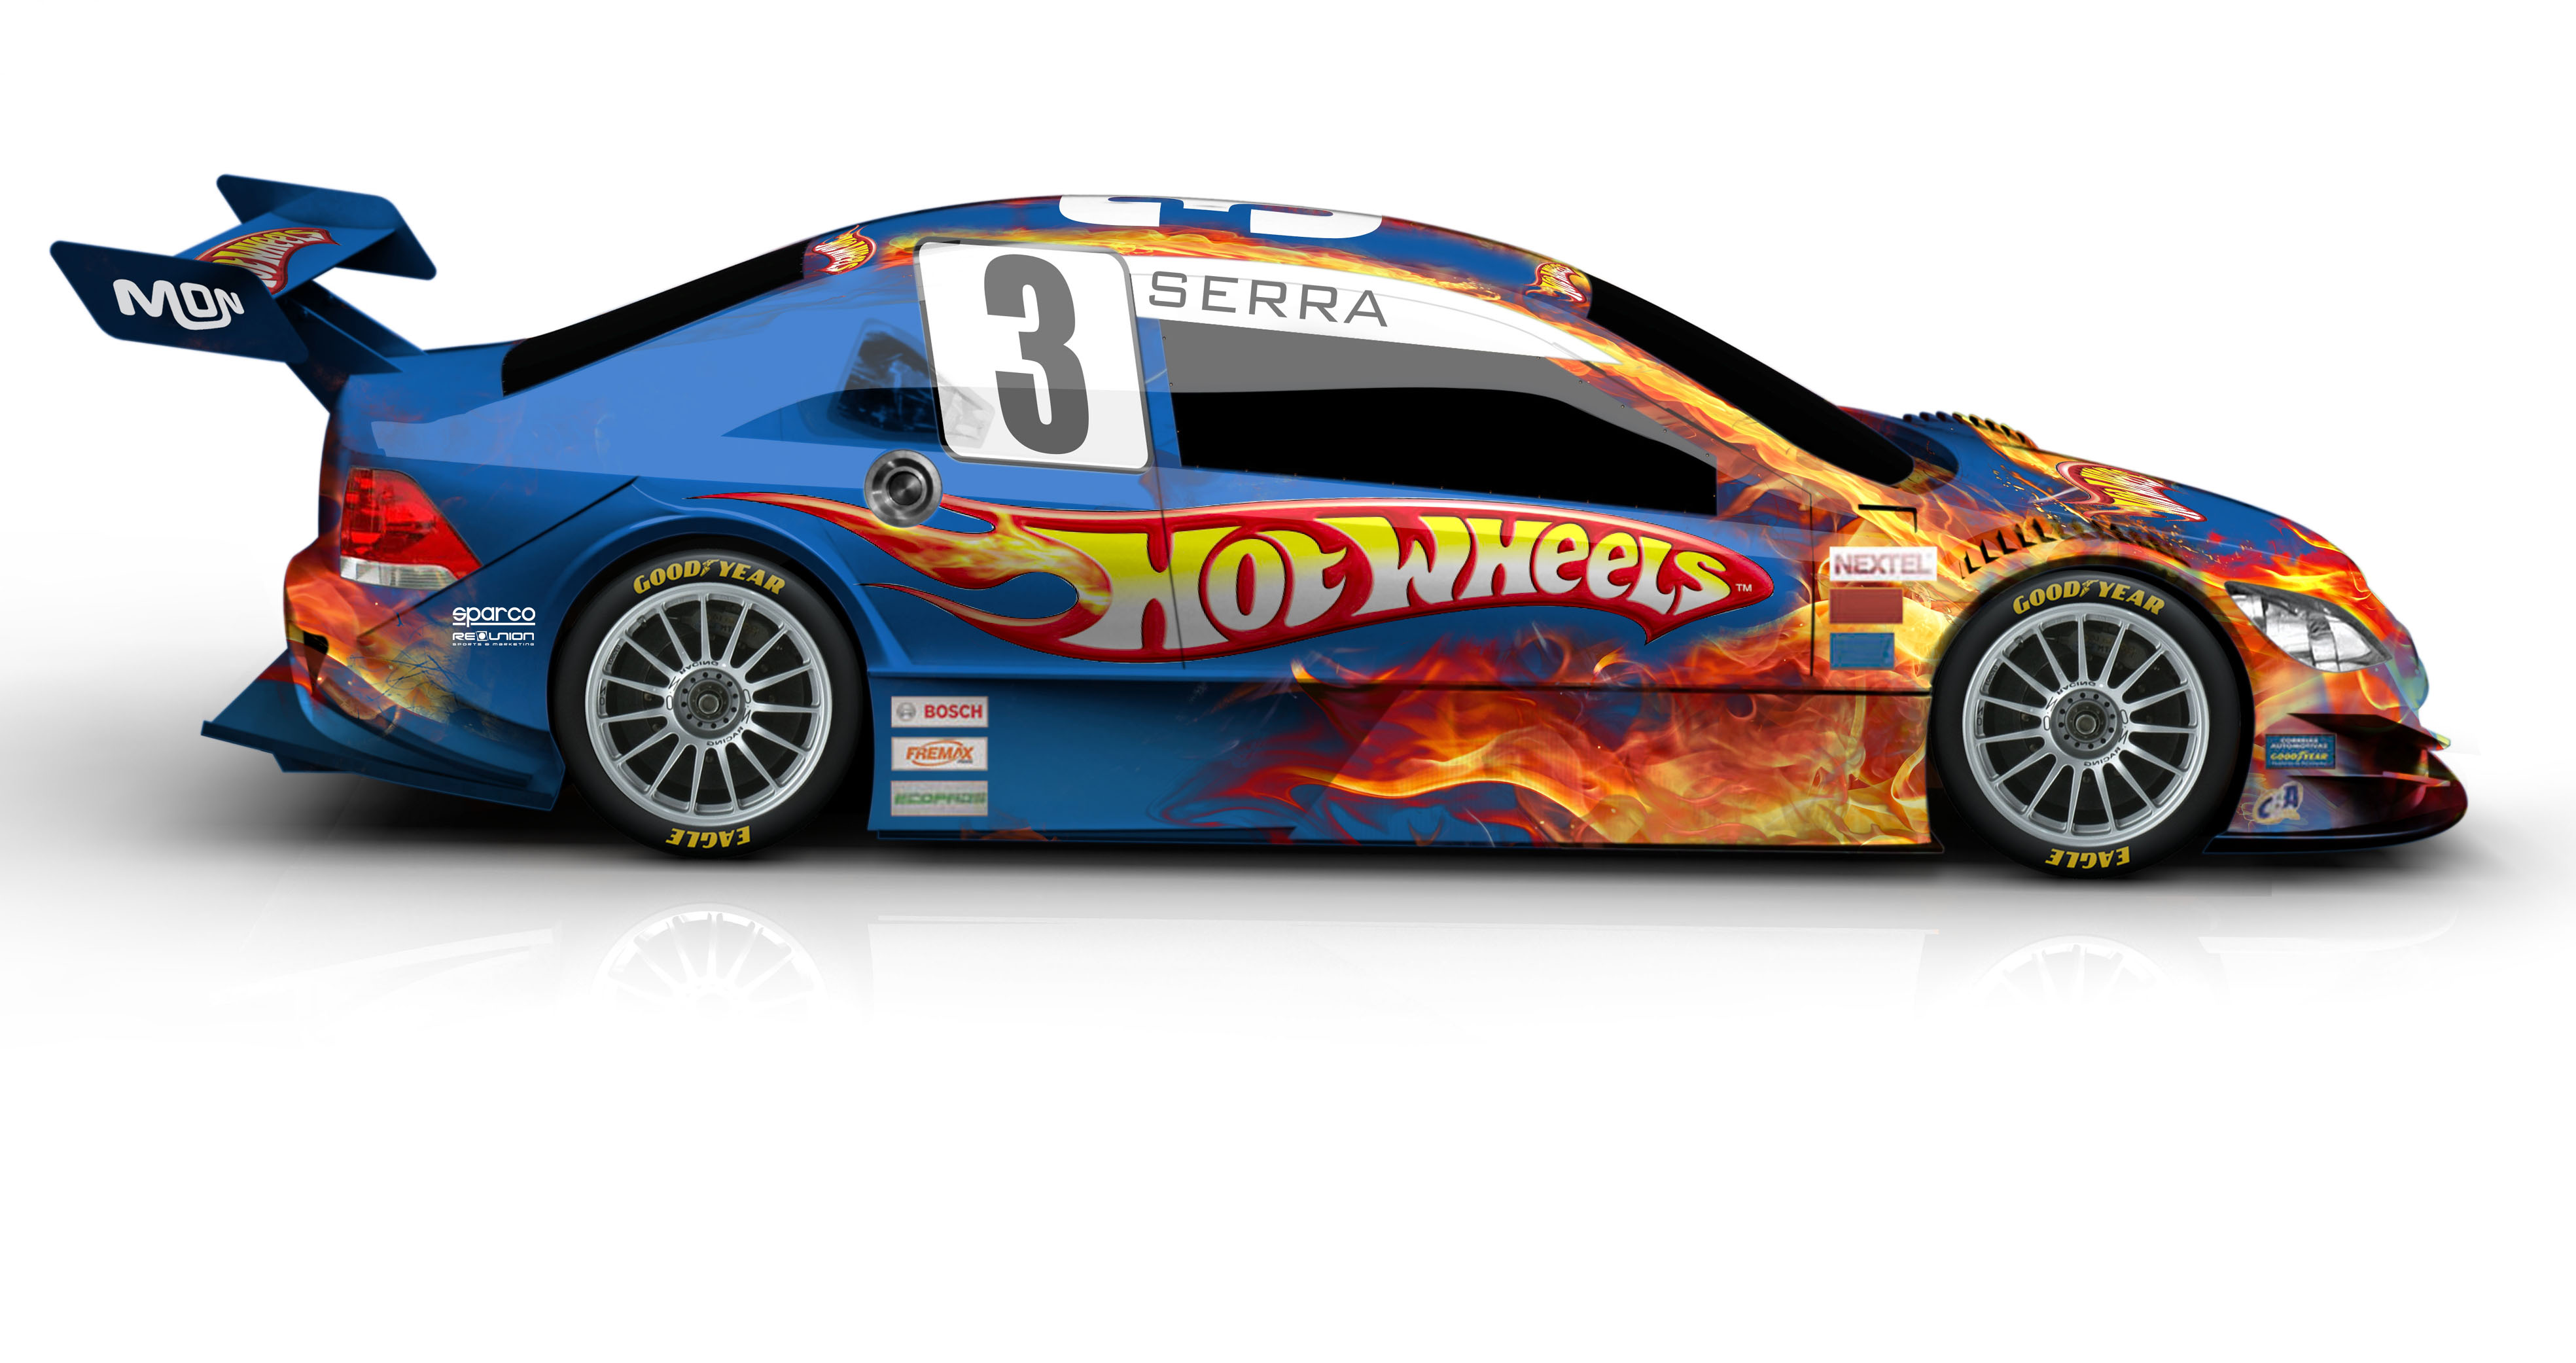 Clip Arts Related To : clip art hot wheels car. 